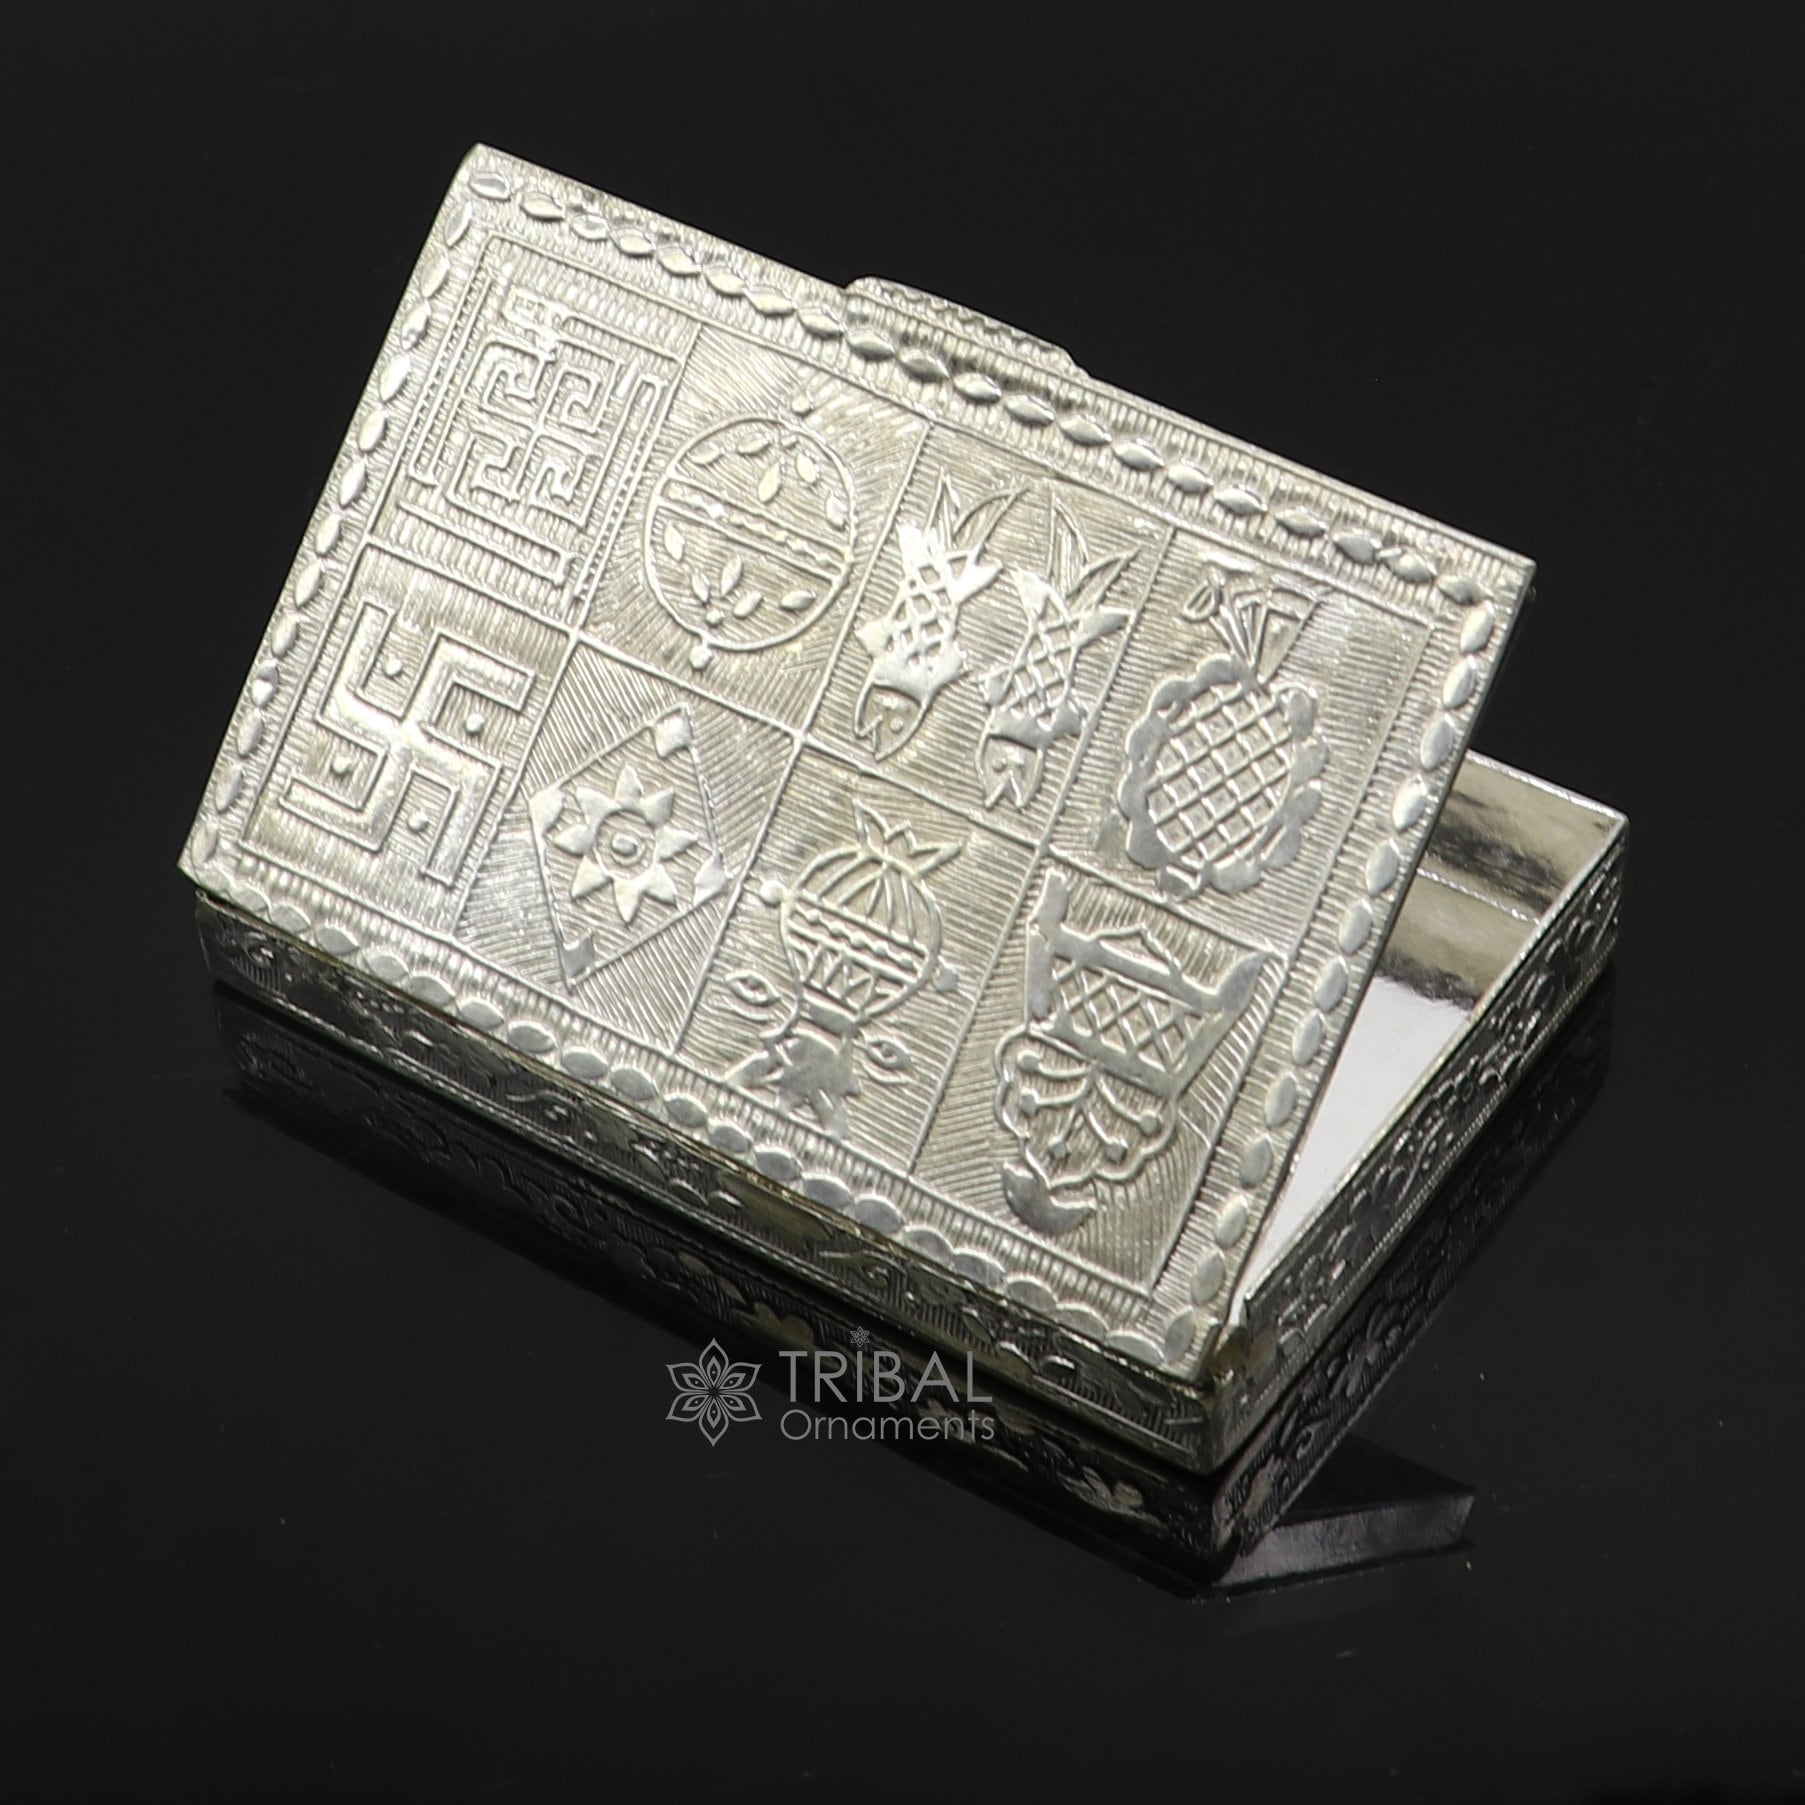 3"X2" 925 sterling silver trinket box, kajal box/casket box brides rectangle shape box collection, container box, eyeliner box stb819 - TRIBAL ORNAMENTS